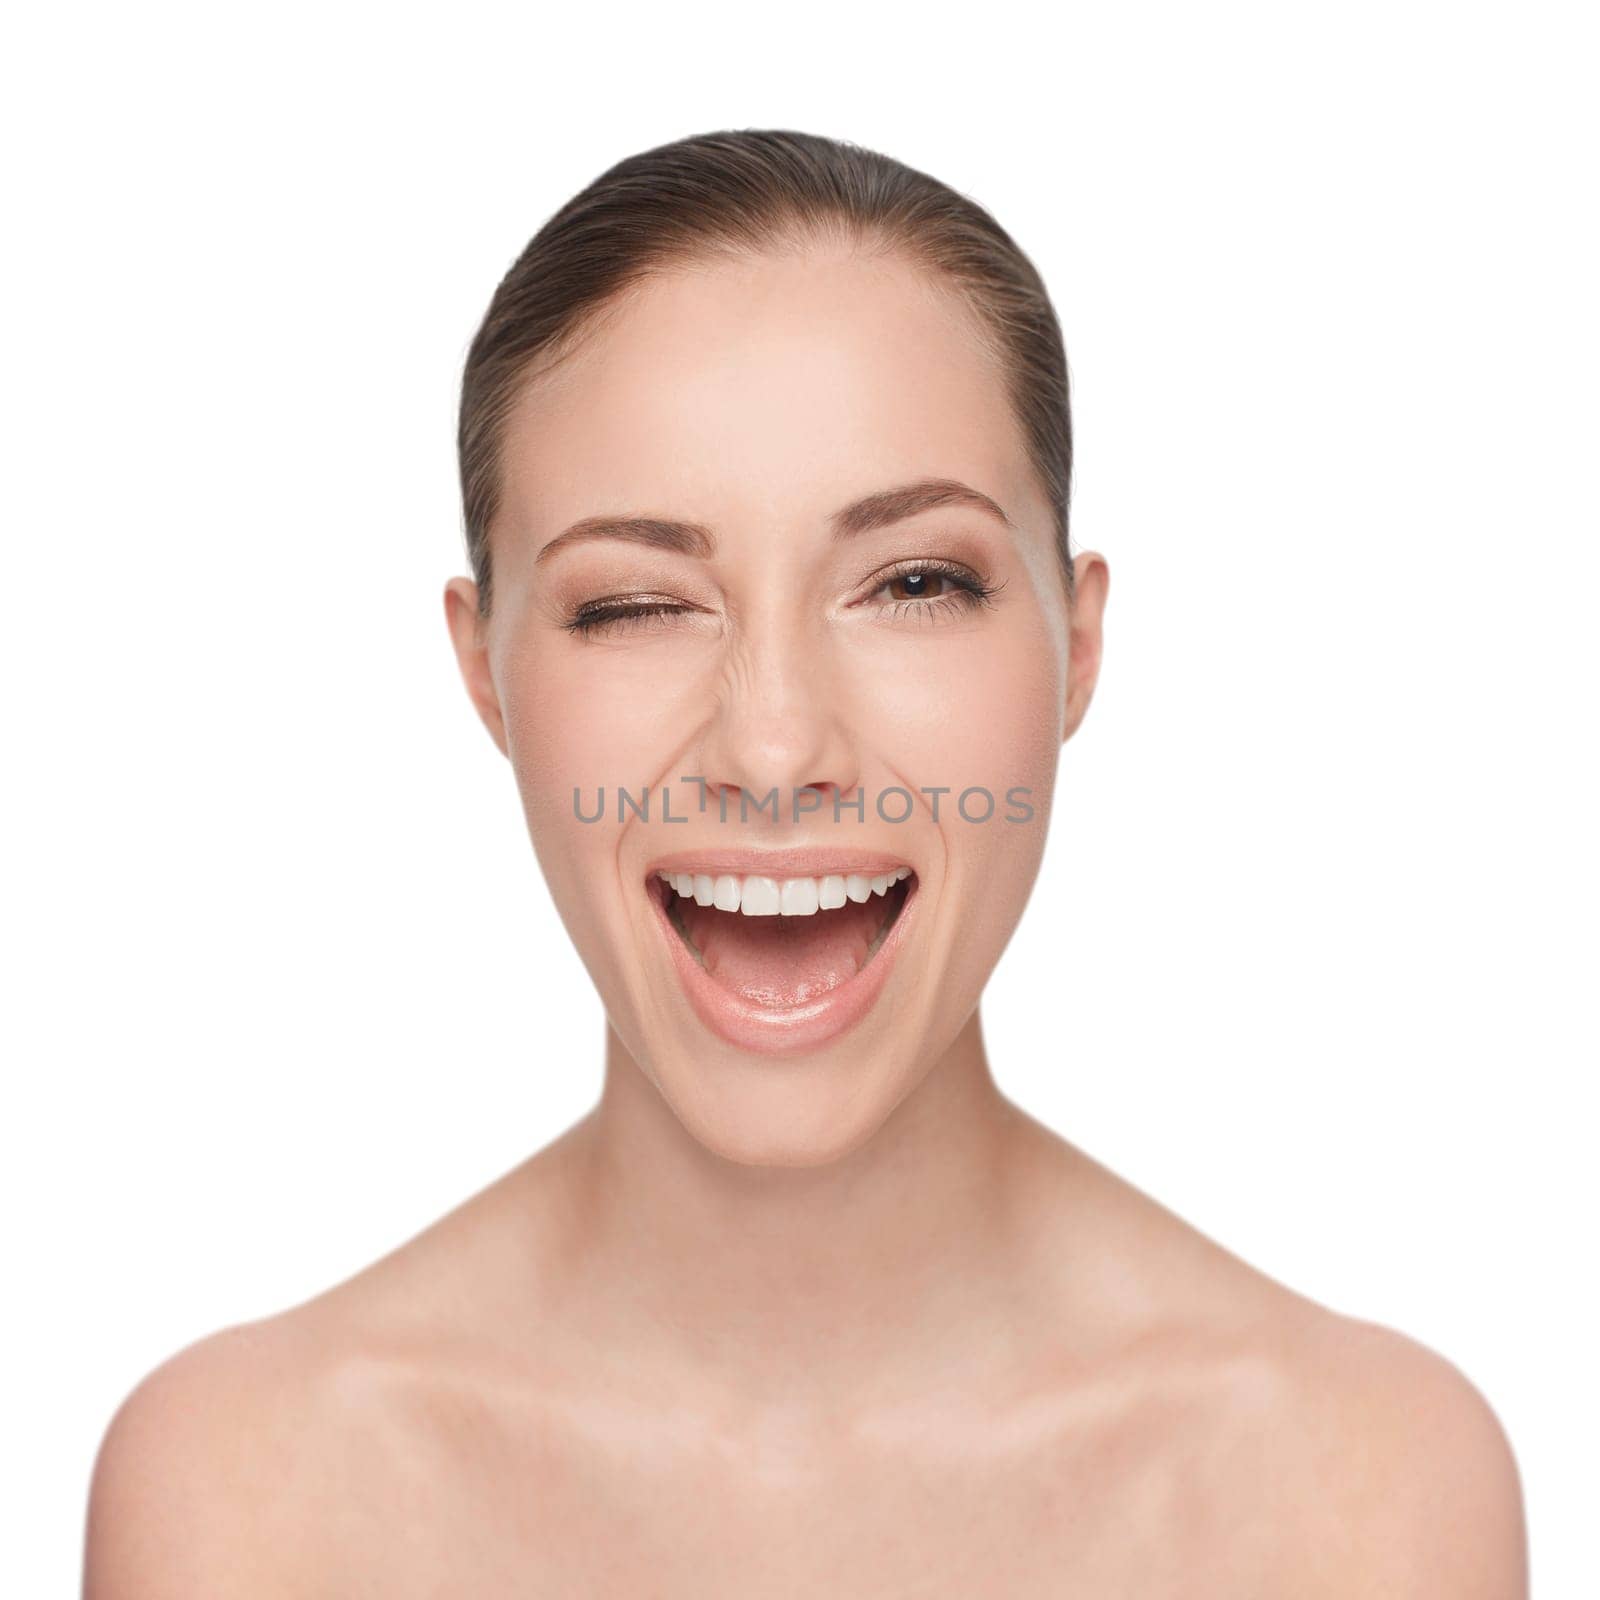 Just for you. Studio beauty portrait of an attractive woman winking at the camera